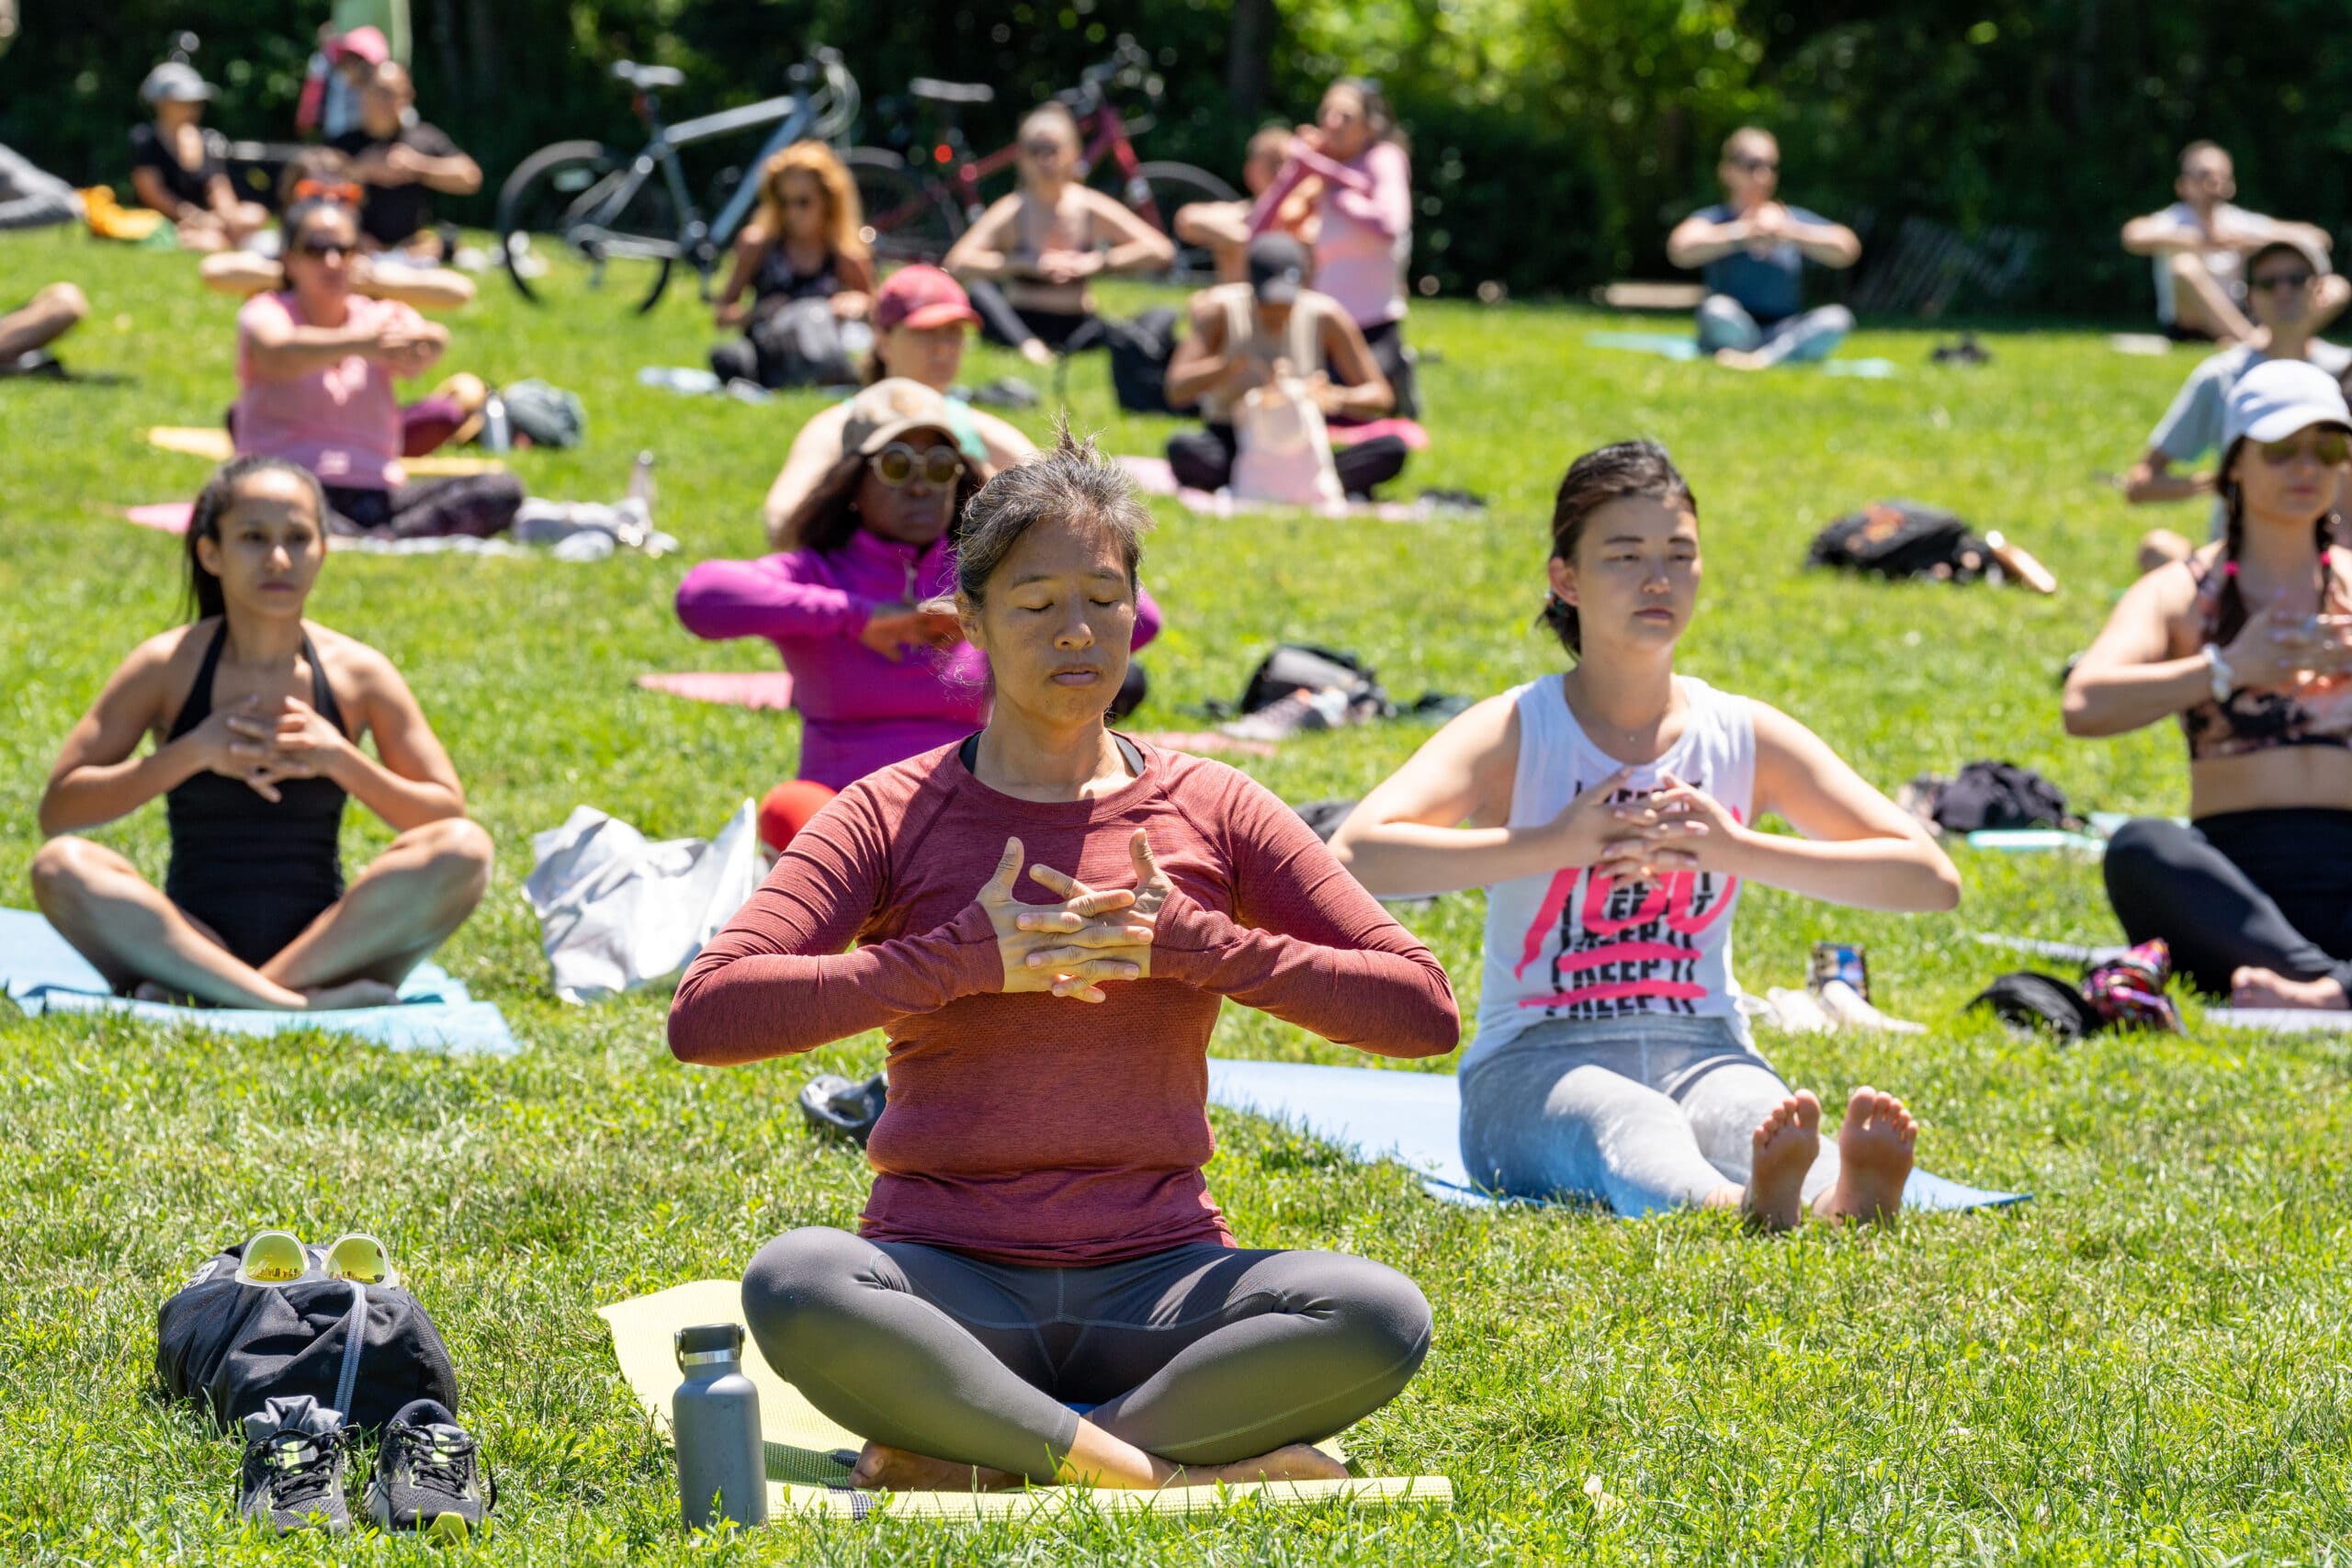 People practicing yoga on green grass, as part of International Day of Yoga 2022 in Brooklyn Bridge Park